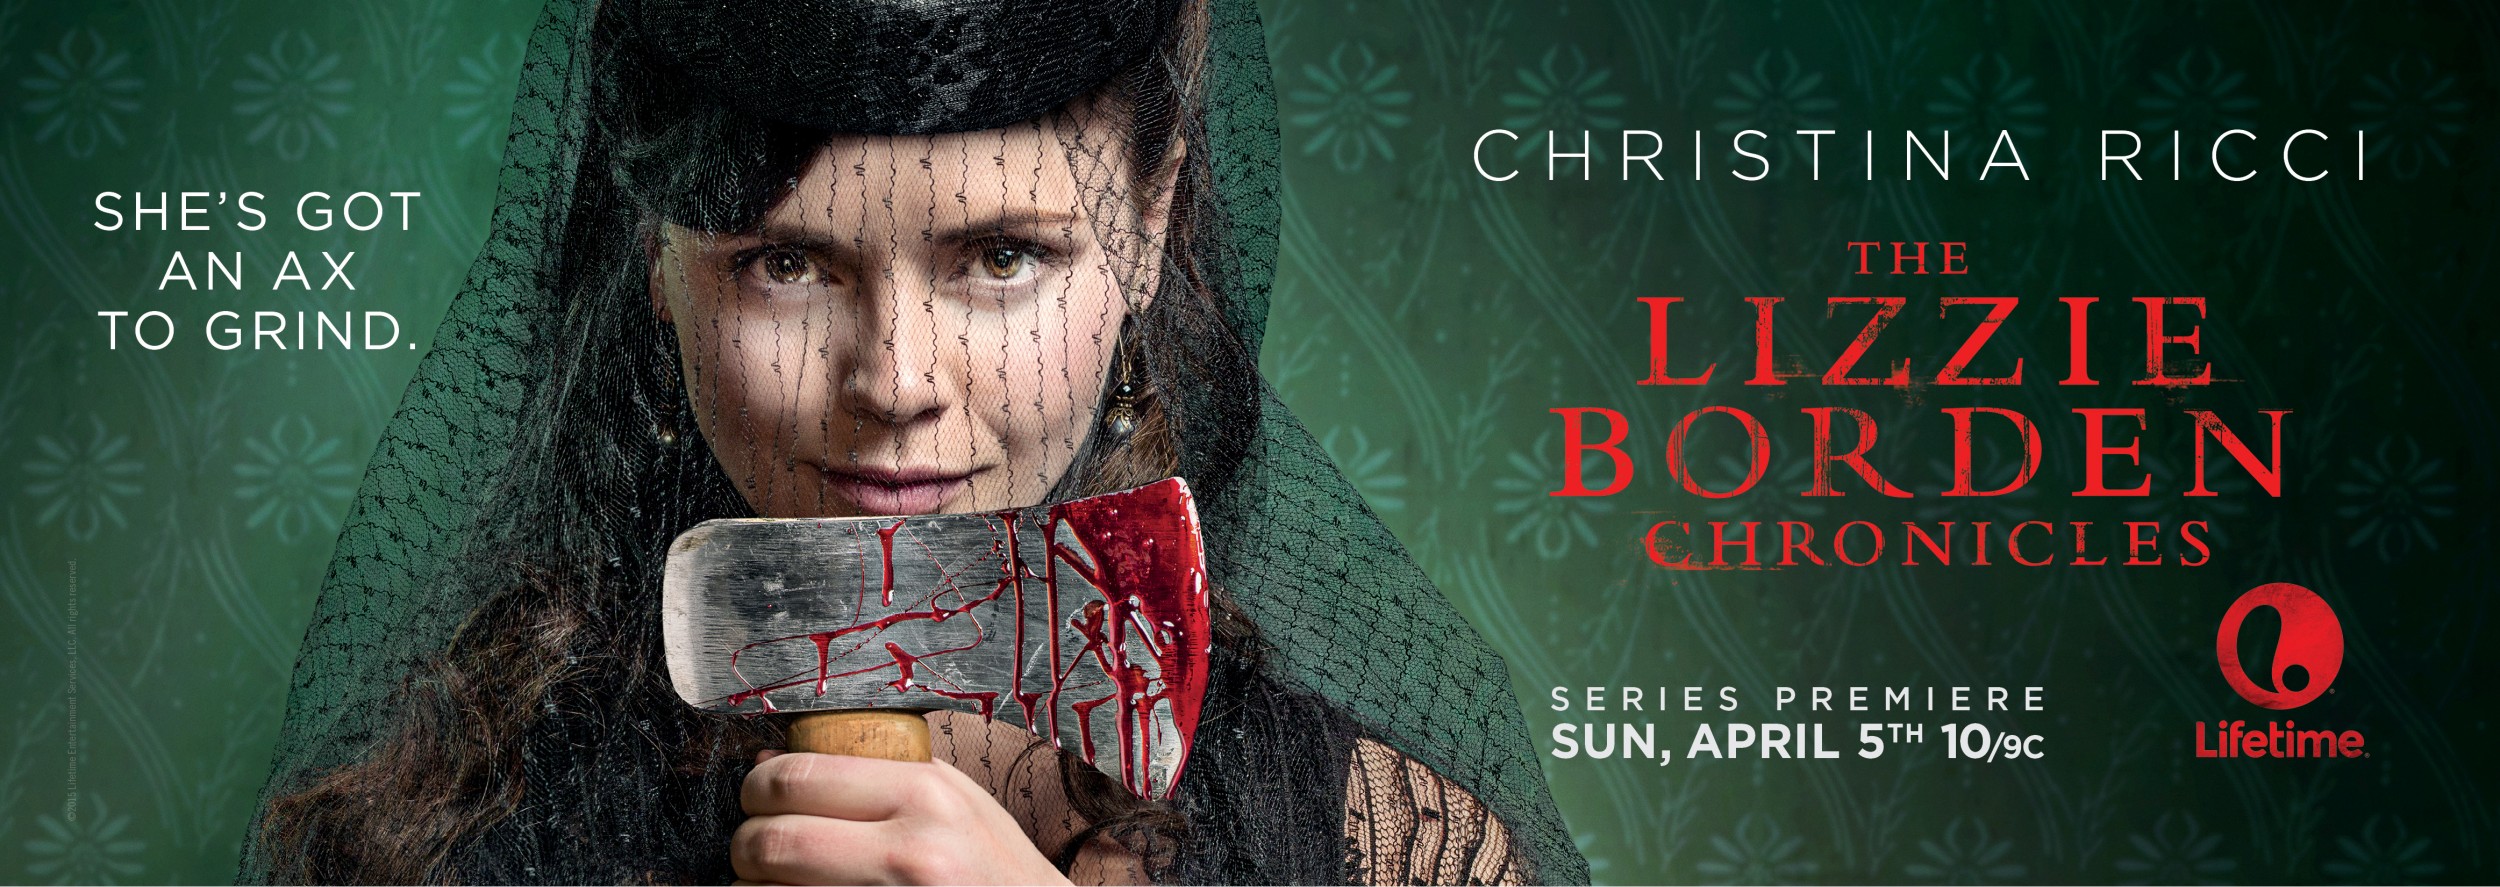 Mega Sized TV Poster Image for The Lizzie Borden Chronicles (#6 of 6)